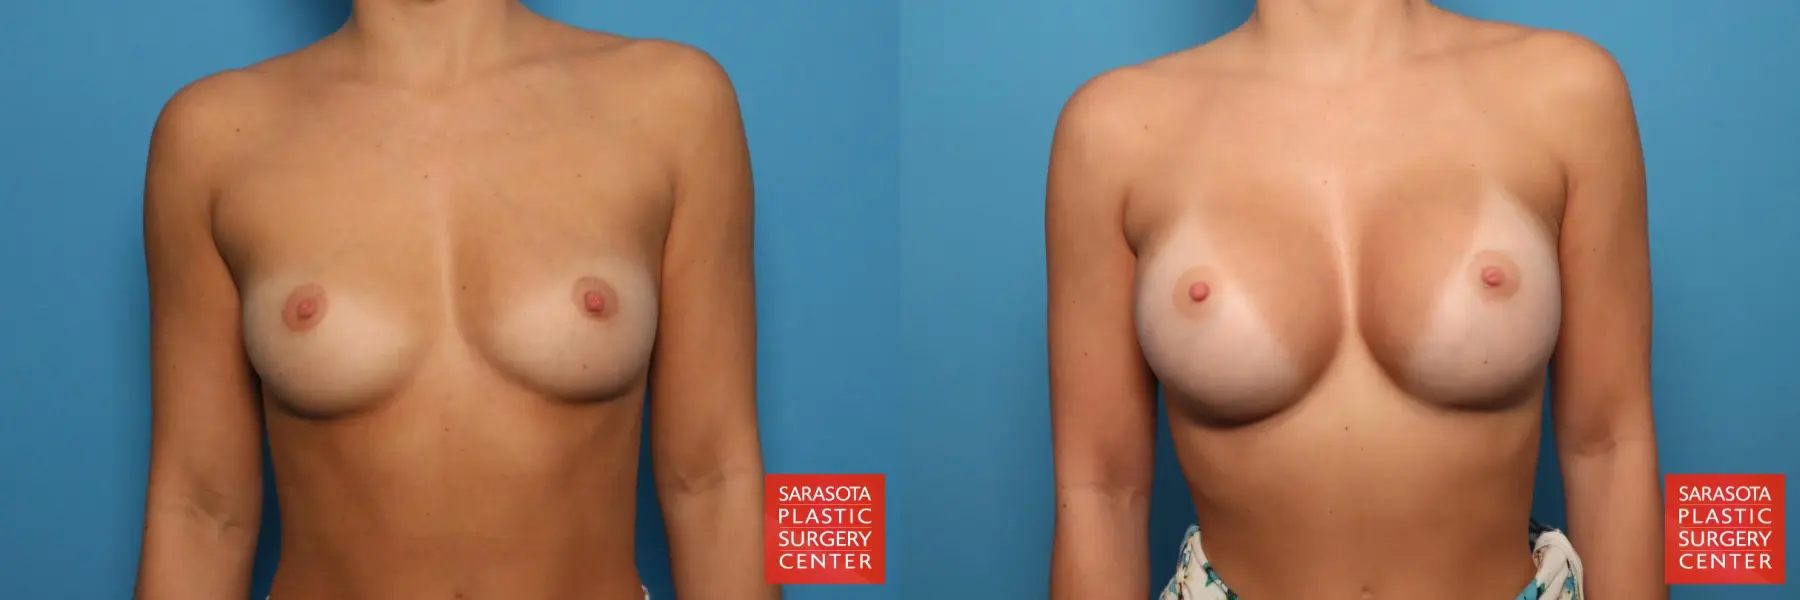 Breast Augmentation: Patient 7 - Before and After 1